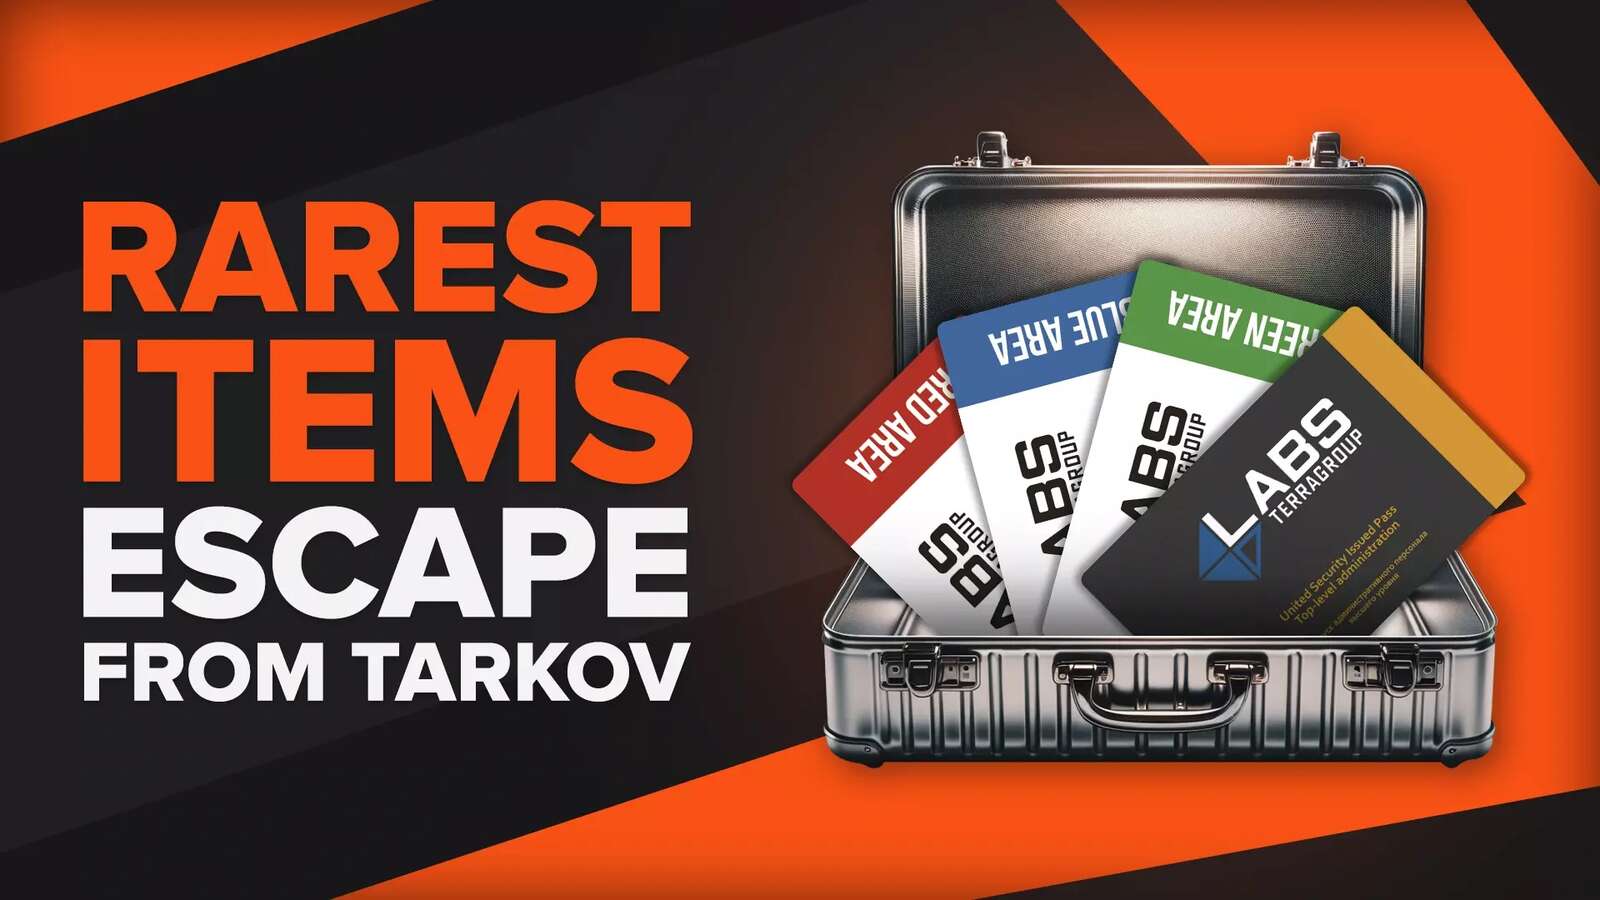 4 Rarest Items In Escape From Tarkov [Ranked]